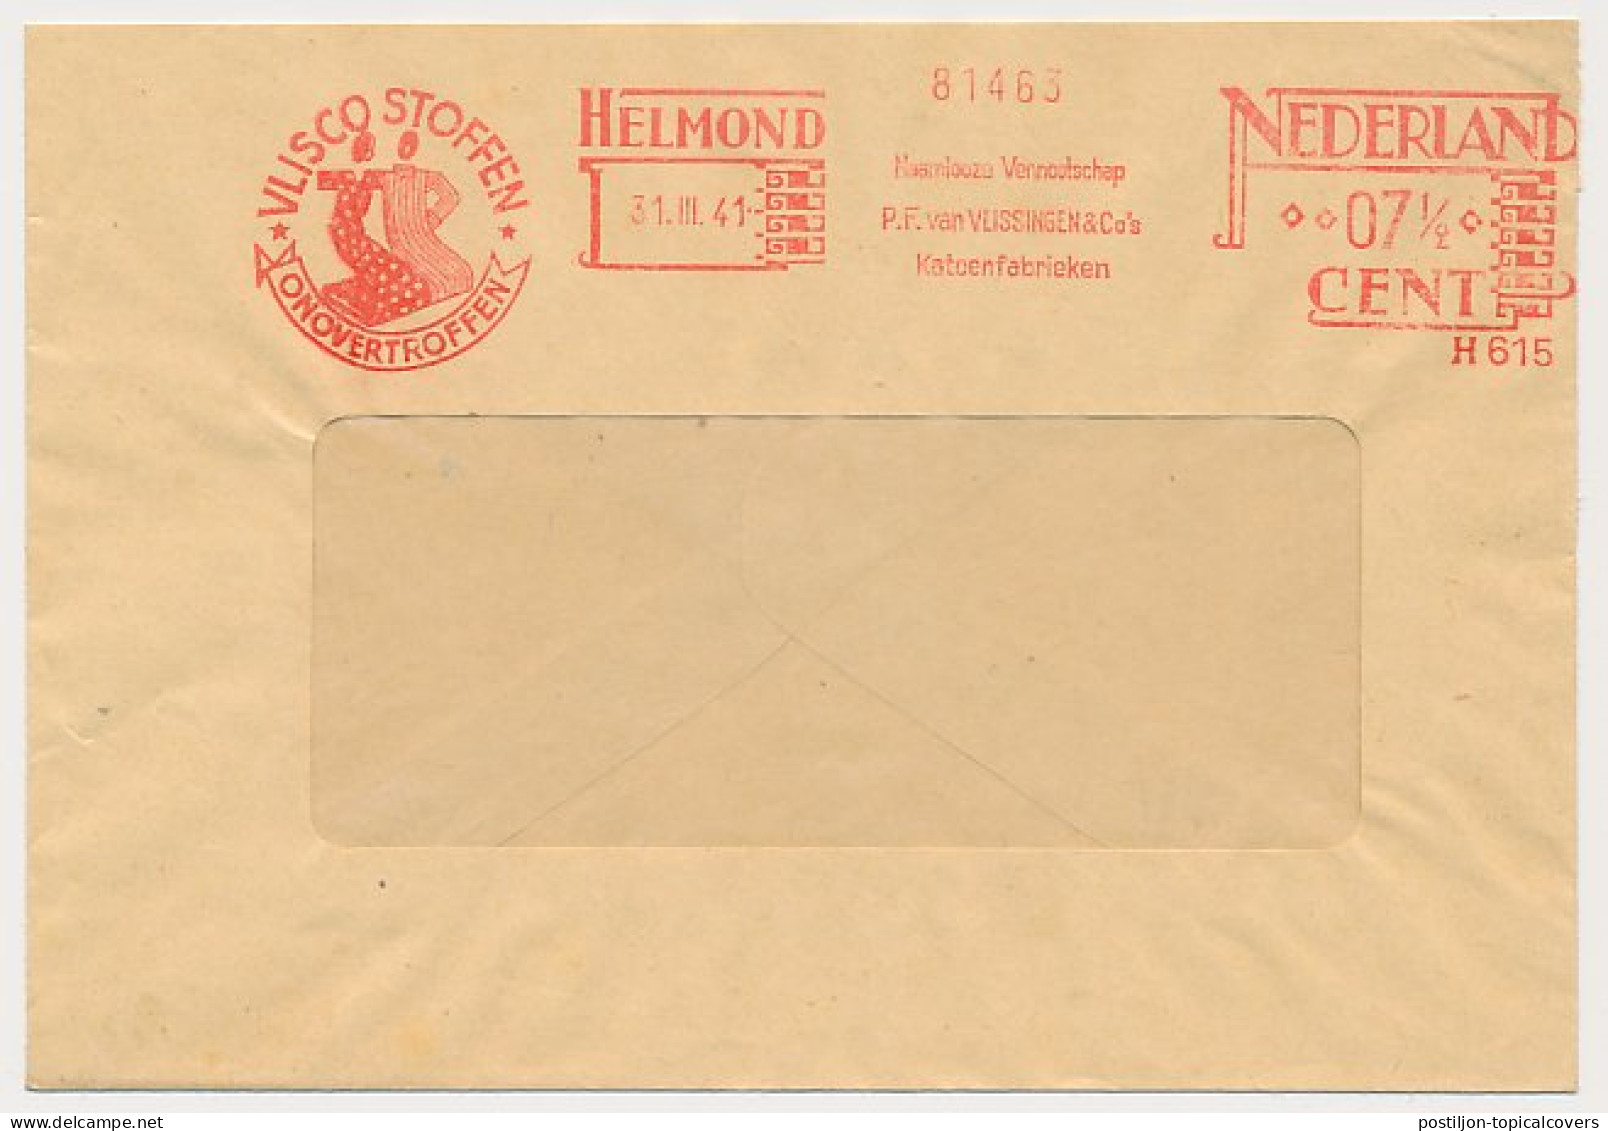 Meter Cover Netherlands 1941 Cotton Factory - Clothing Fabrics - Helmond - Textile